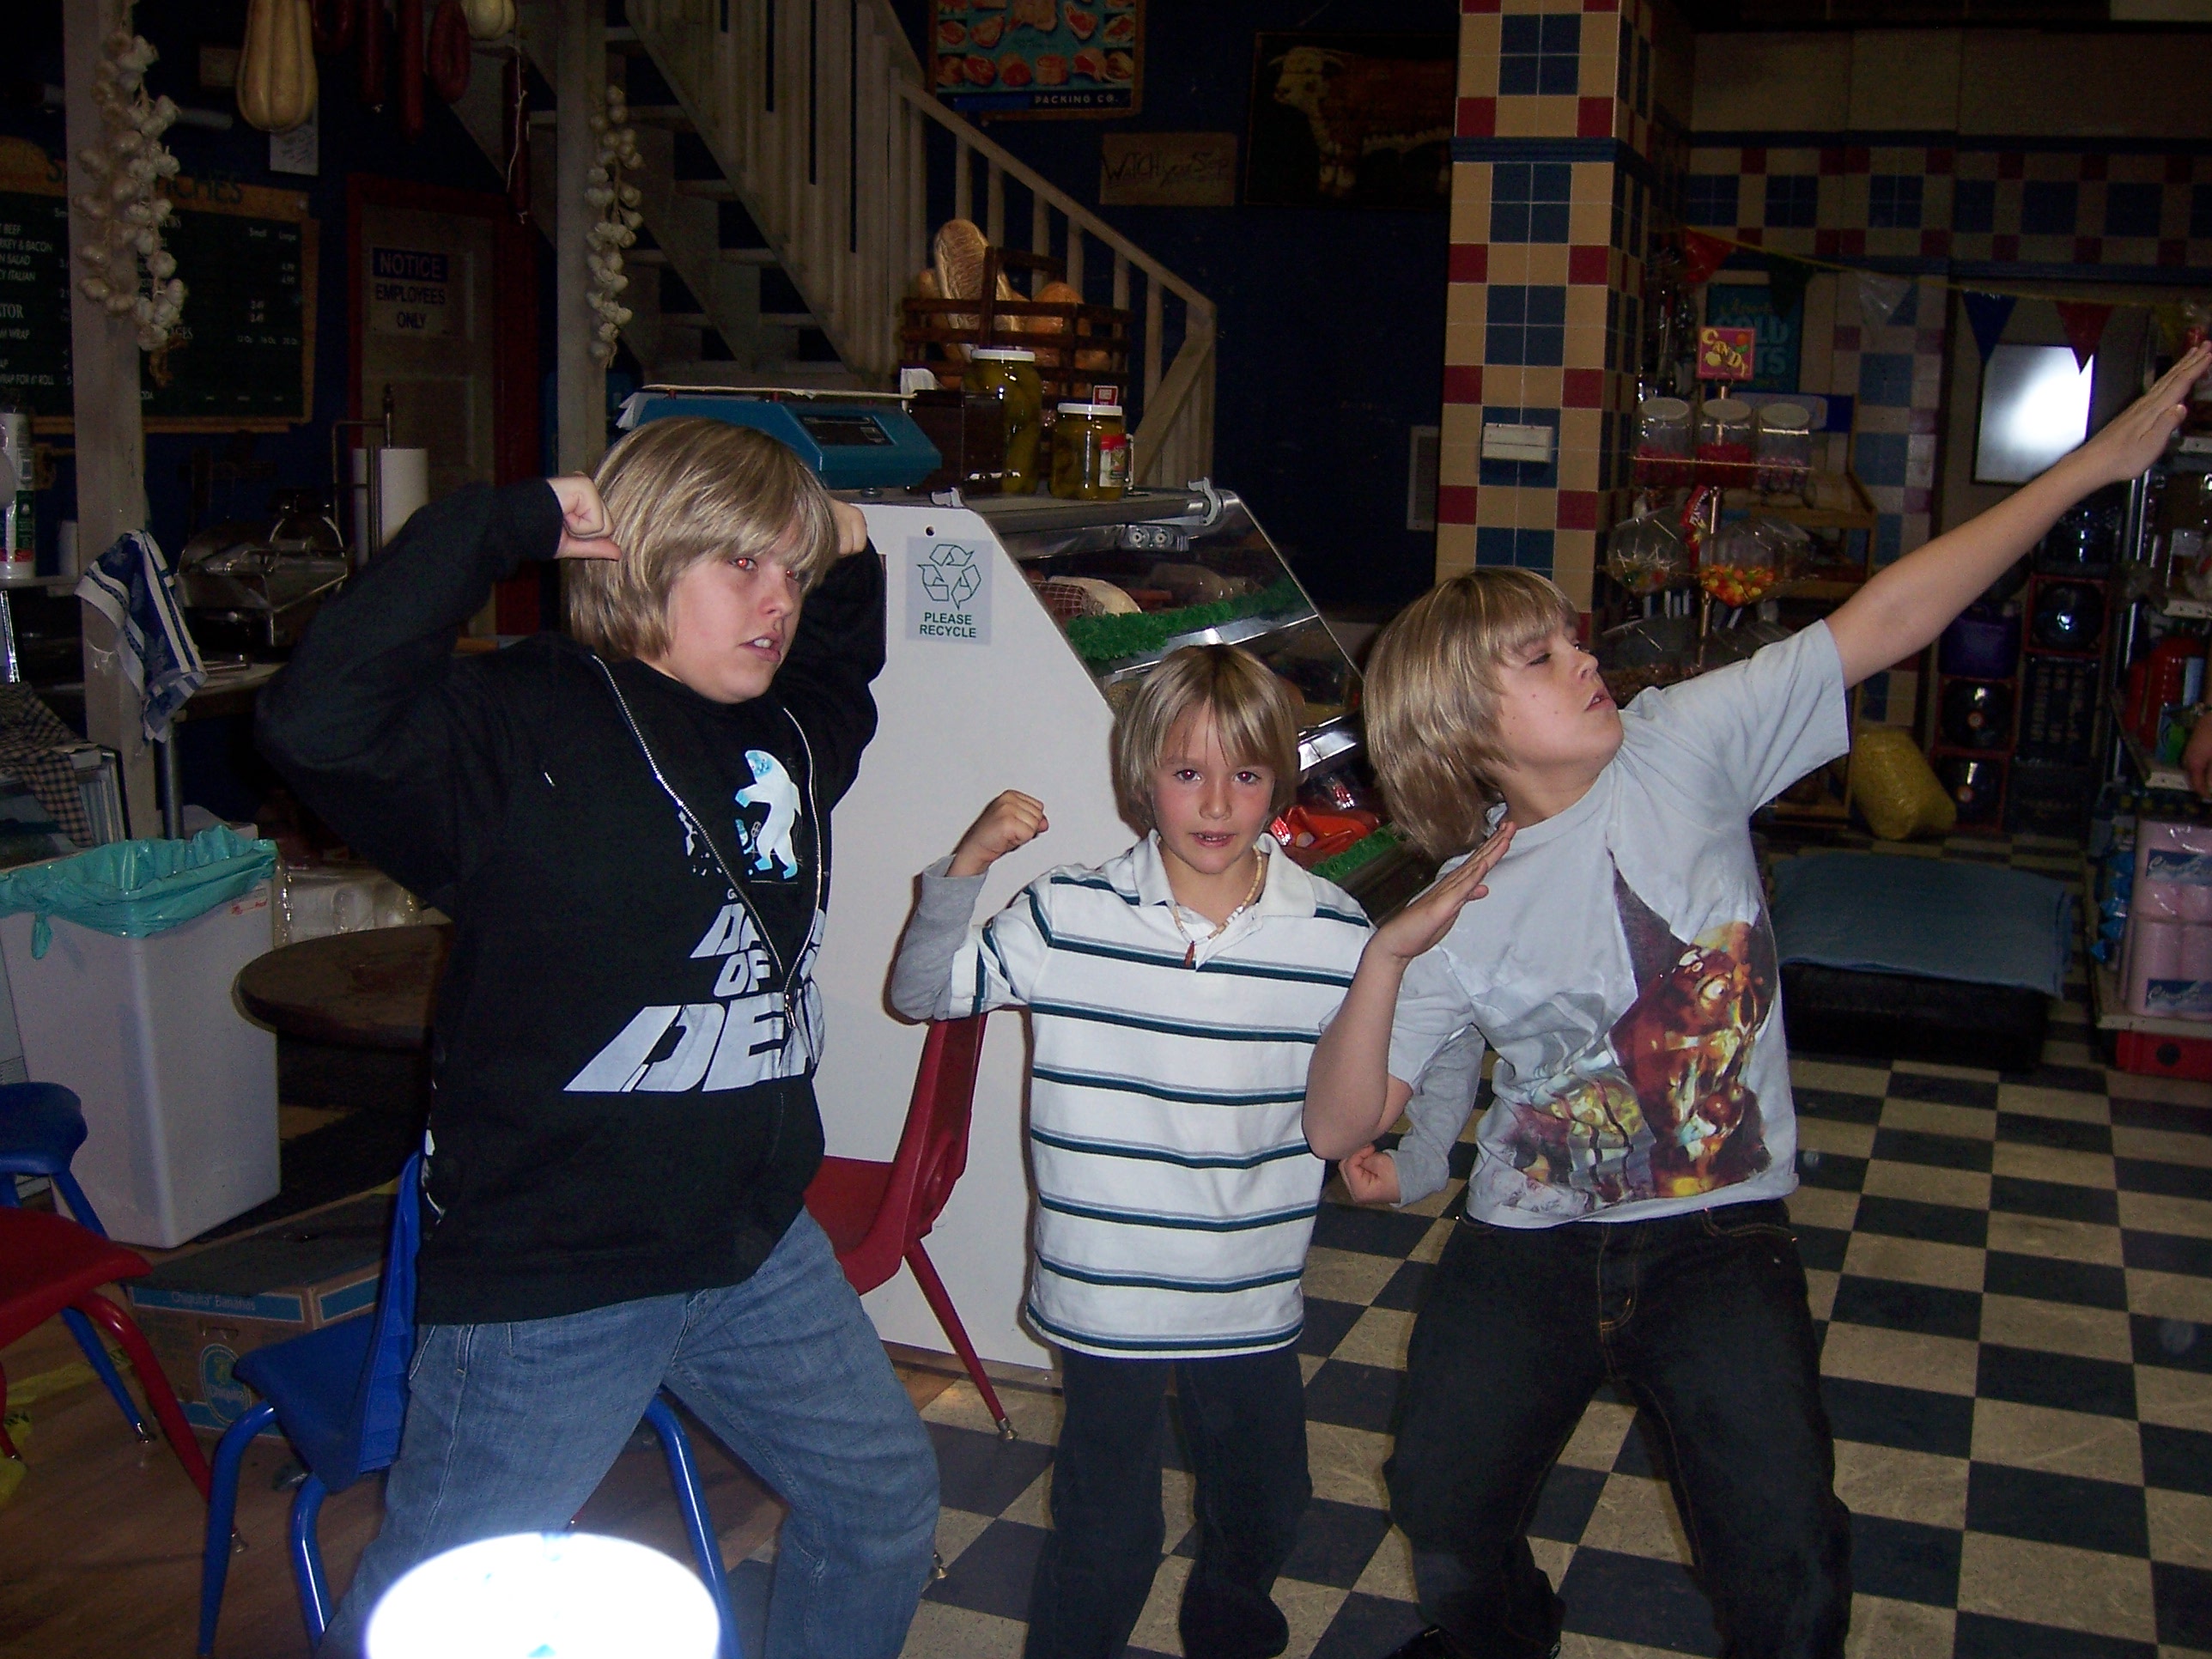 Alec Gray with Dylan and Cole Sprouse on set of Suite Life of Zack and Cody